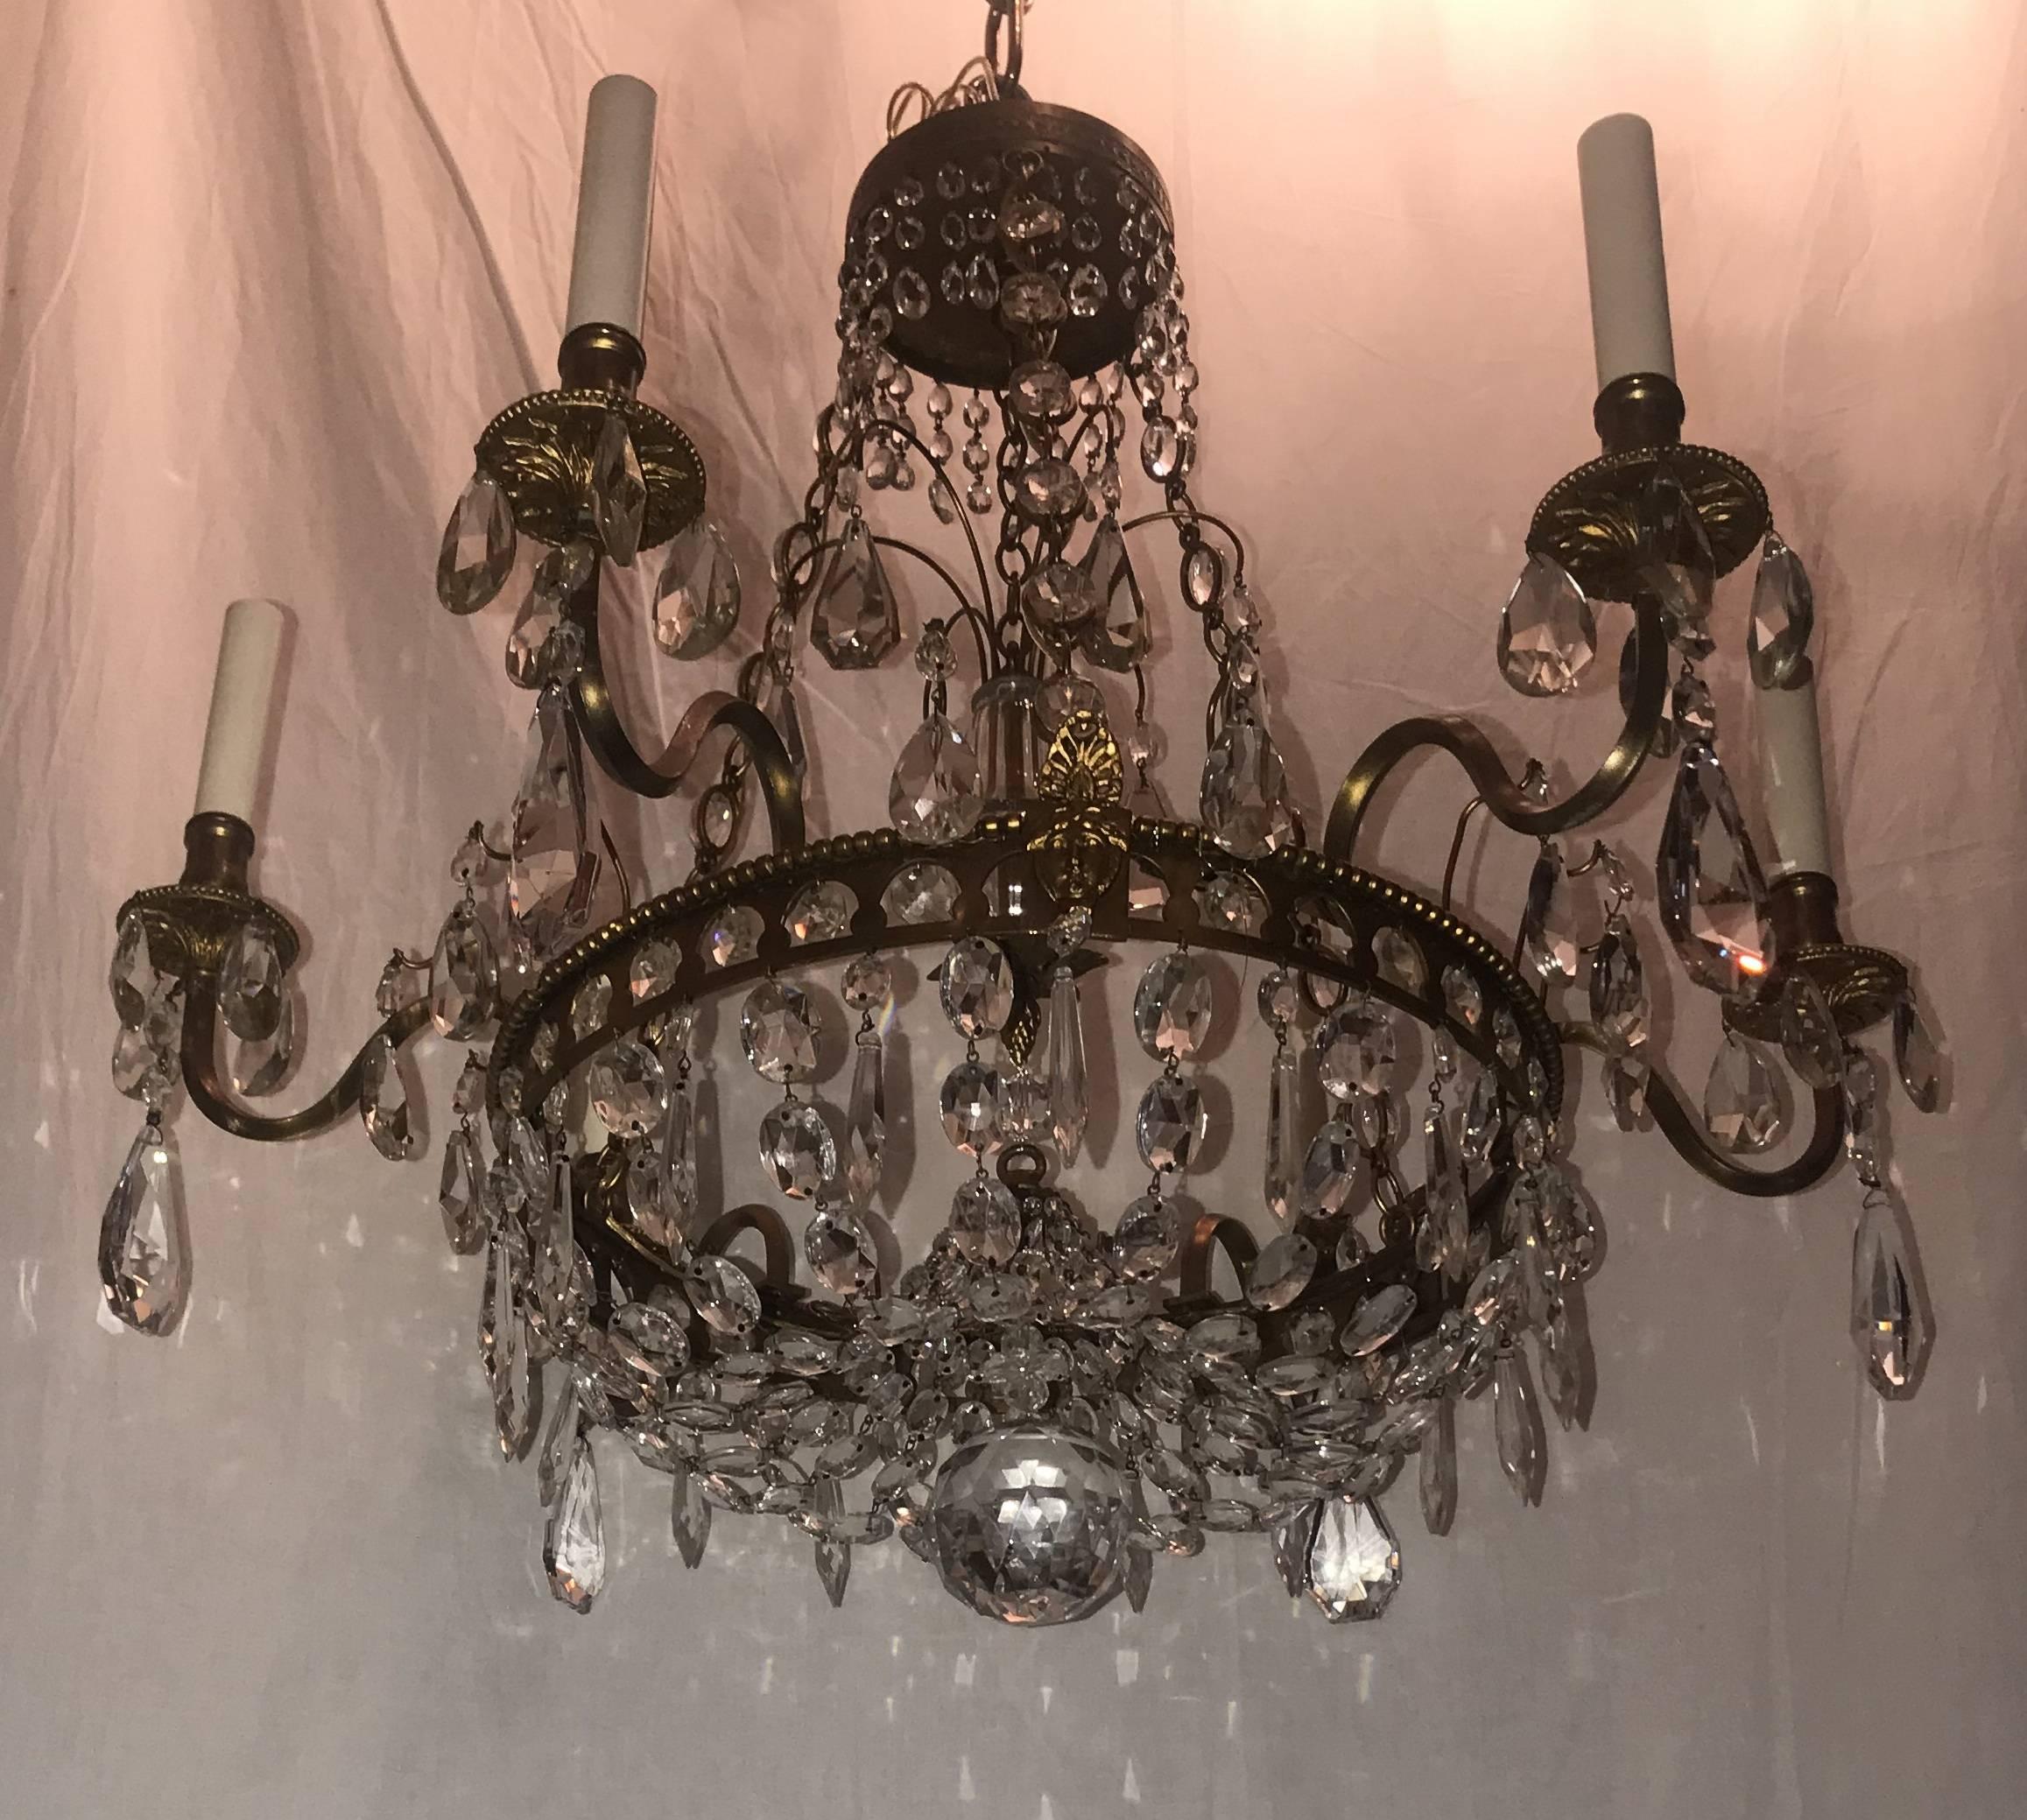 A wonderful French Empire / neoclassical / Regency bronze and graduating crystal basket form chandelier with medusa heads and six candelabra sockets around the outer frame and a beautiful centre spray medallion and finished with a centre ball.